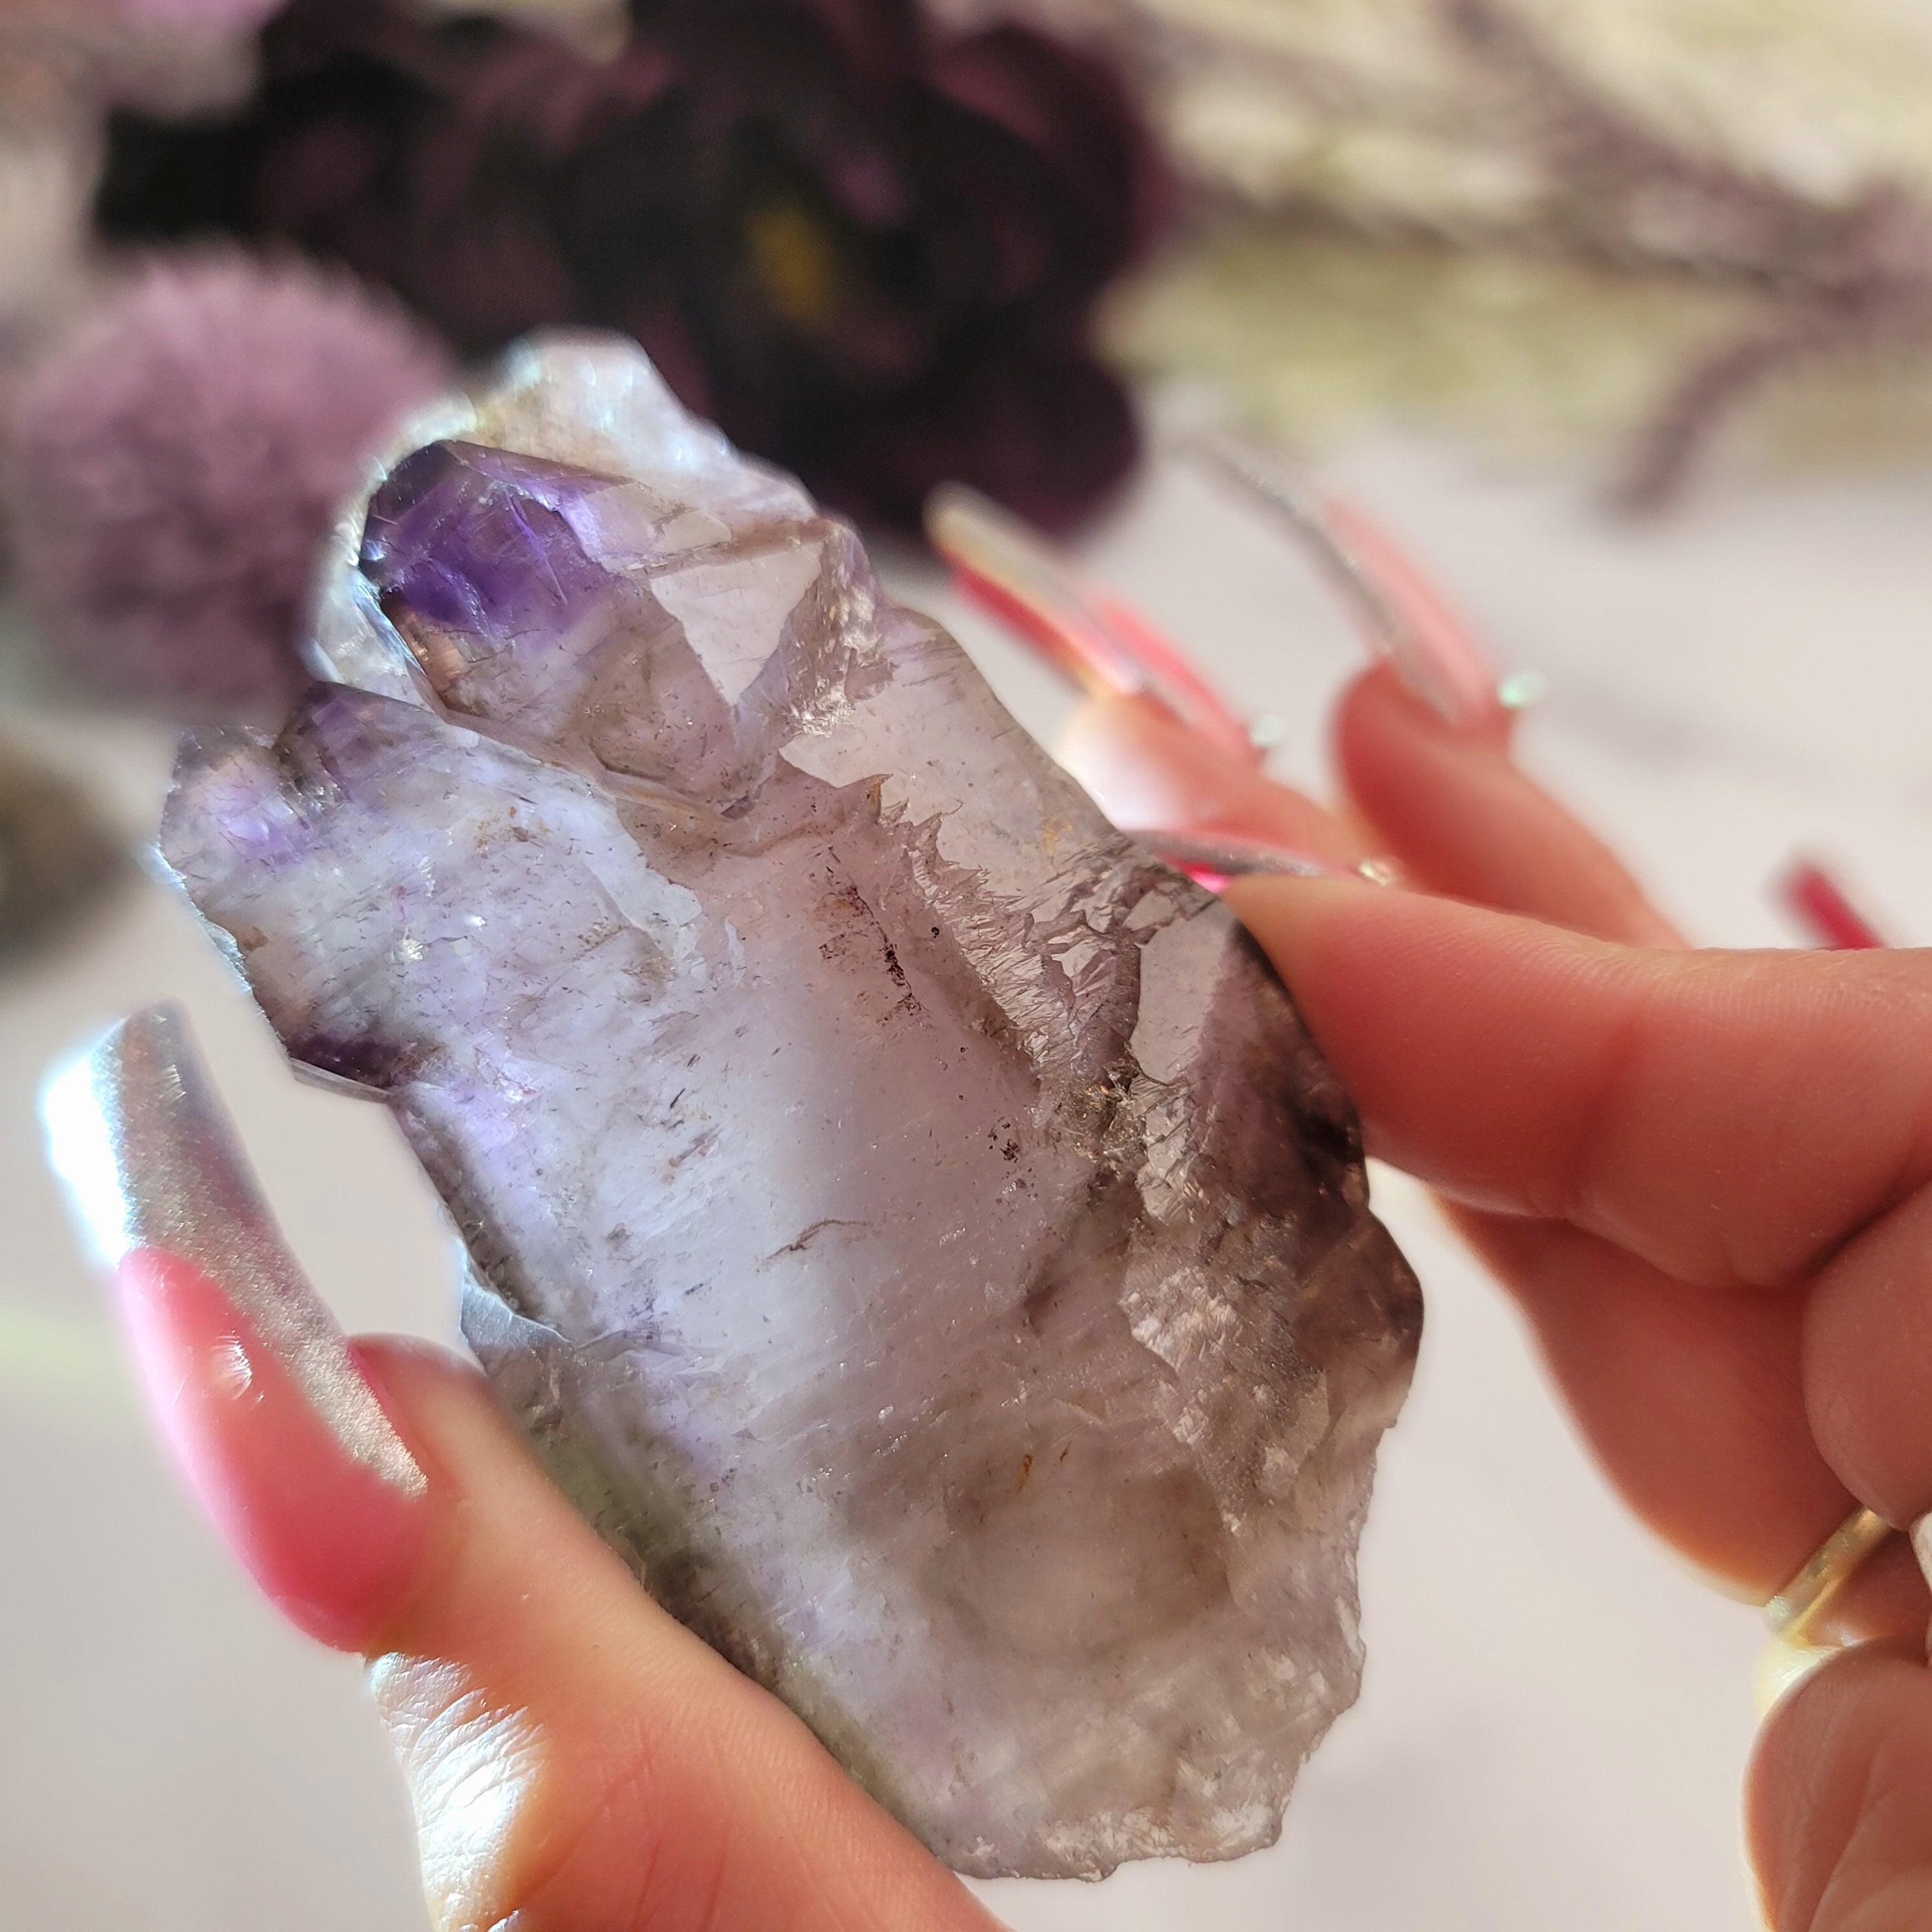 Smokey Amethyst Scepter with Lepidocrocite Inclusions for Intuition, Connection with the Divine and Past Life Recall